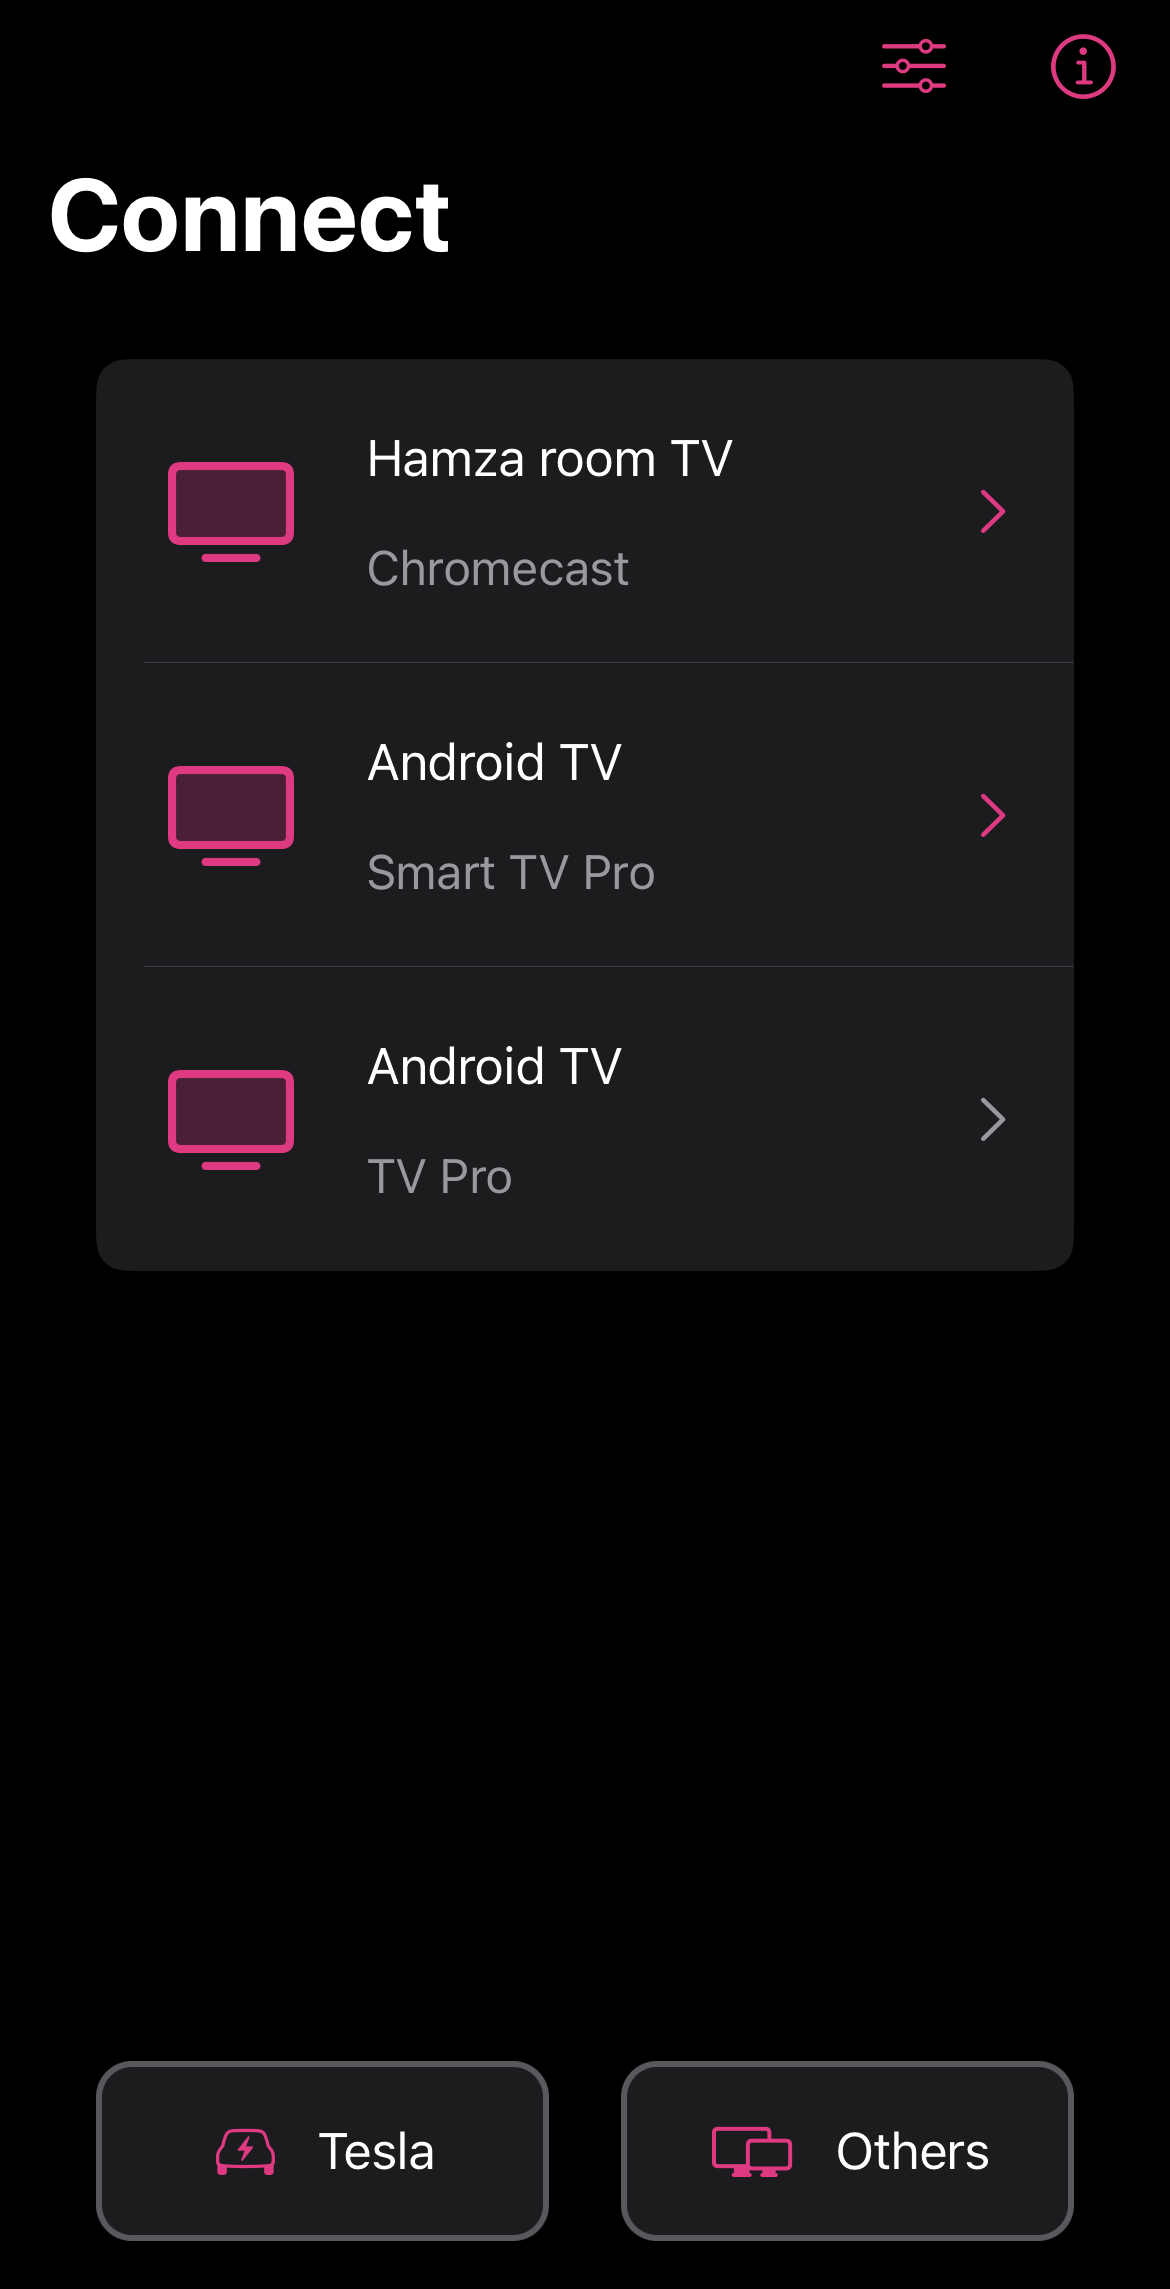 List of the Chromecast devices on the Replica app